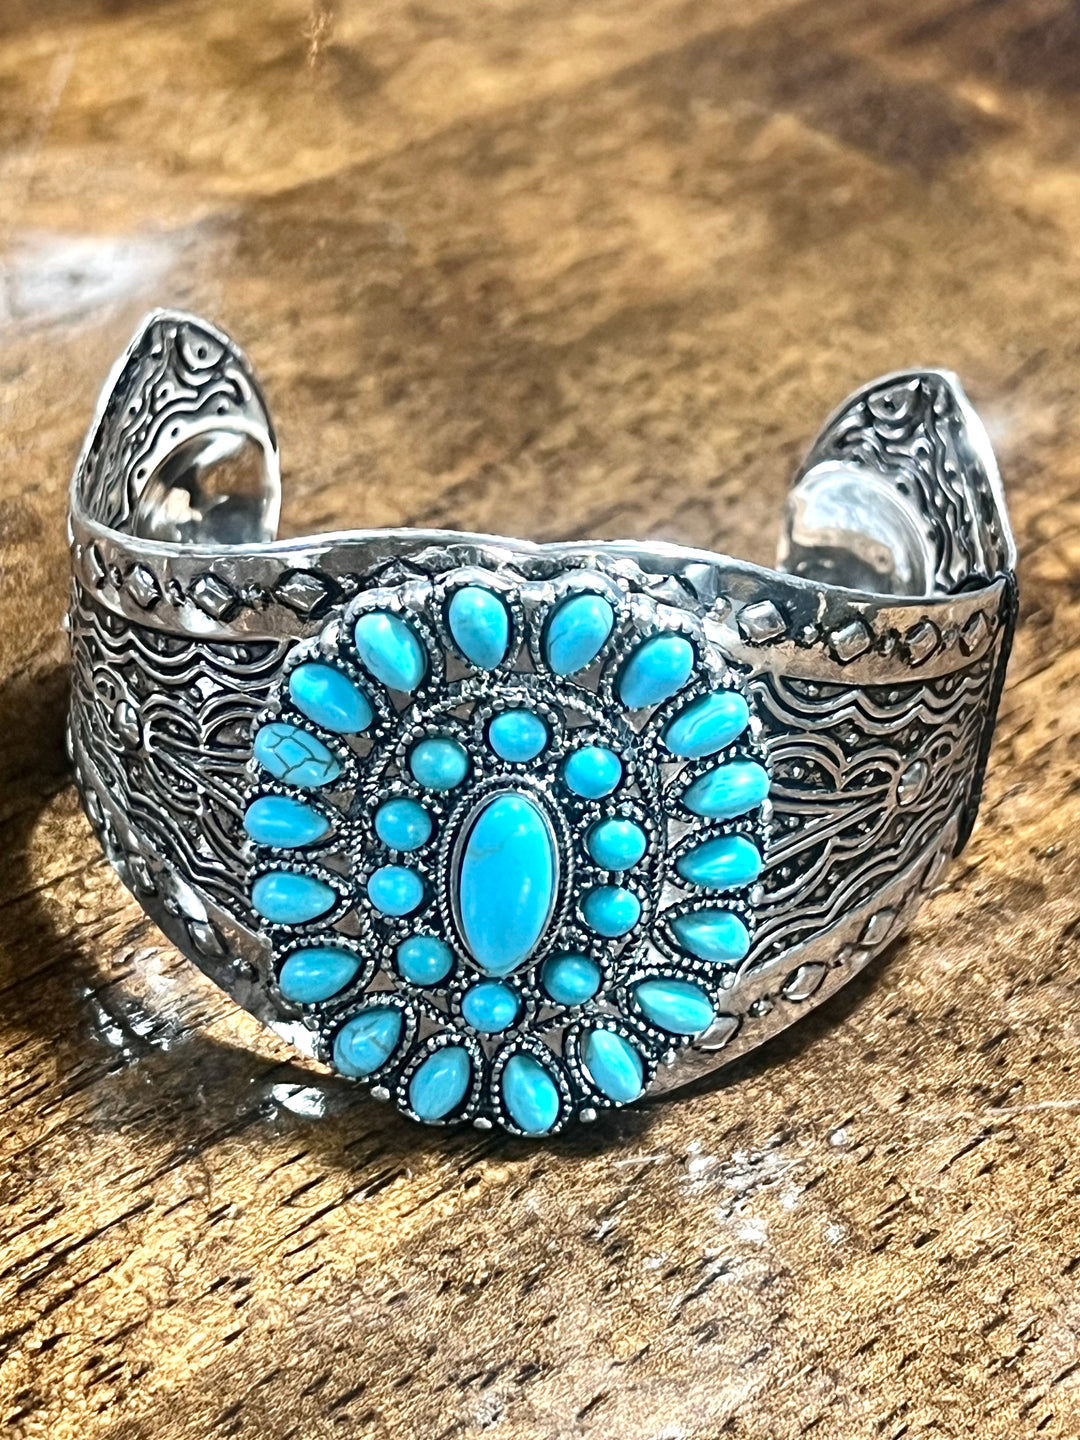 Silver with Turquoise Squash blossom Cuff Bracelet